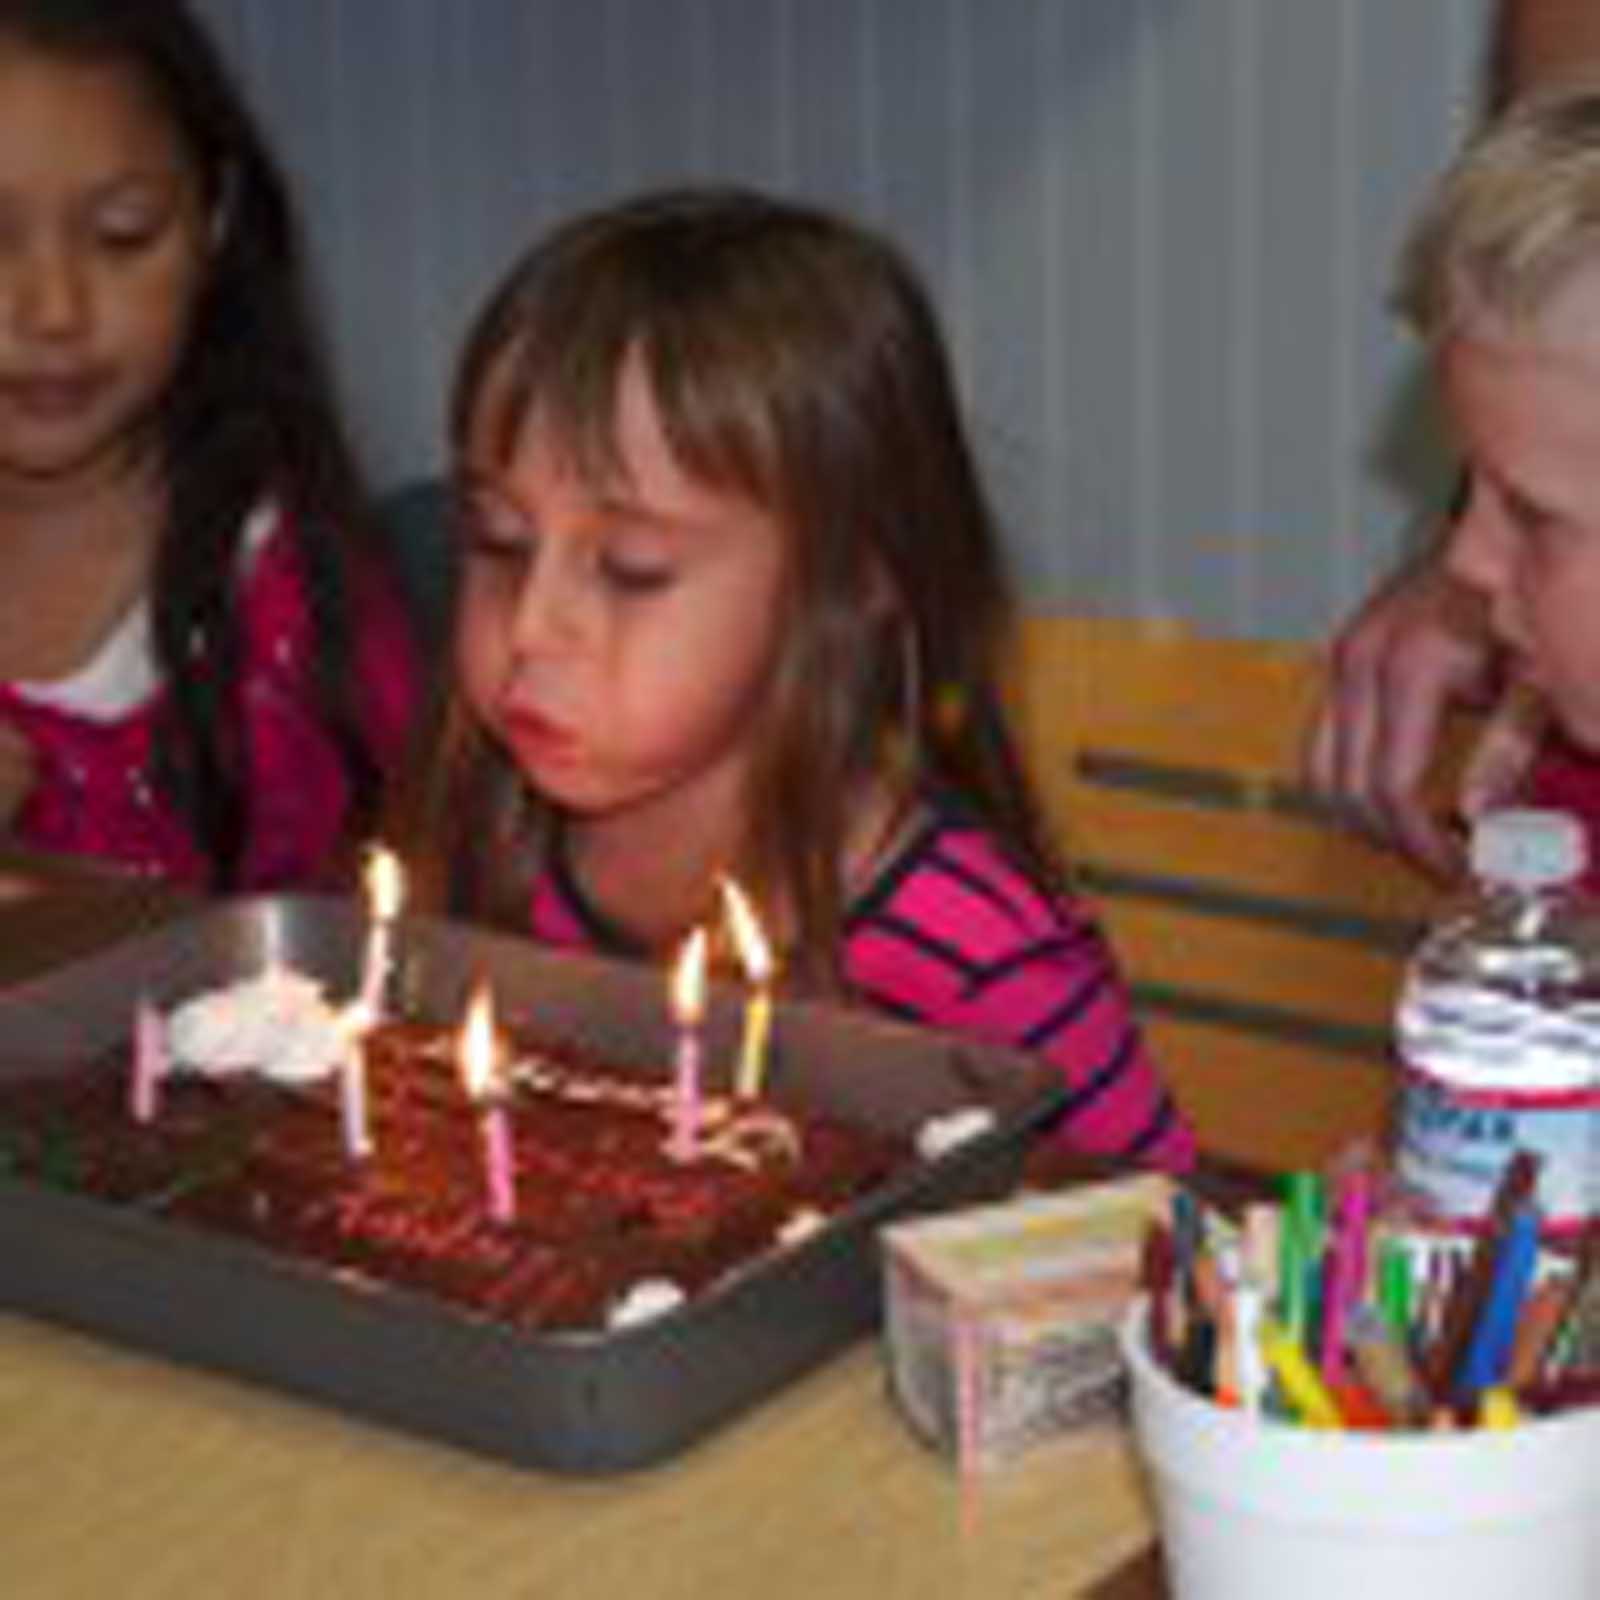 Blowing out her candles on her 6th birthday.